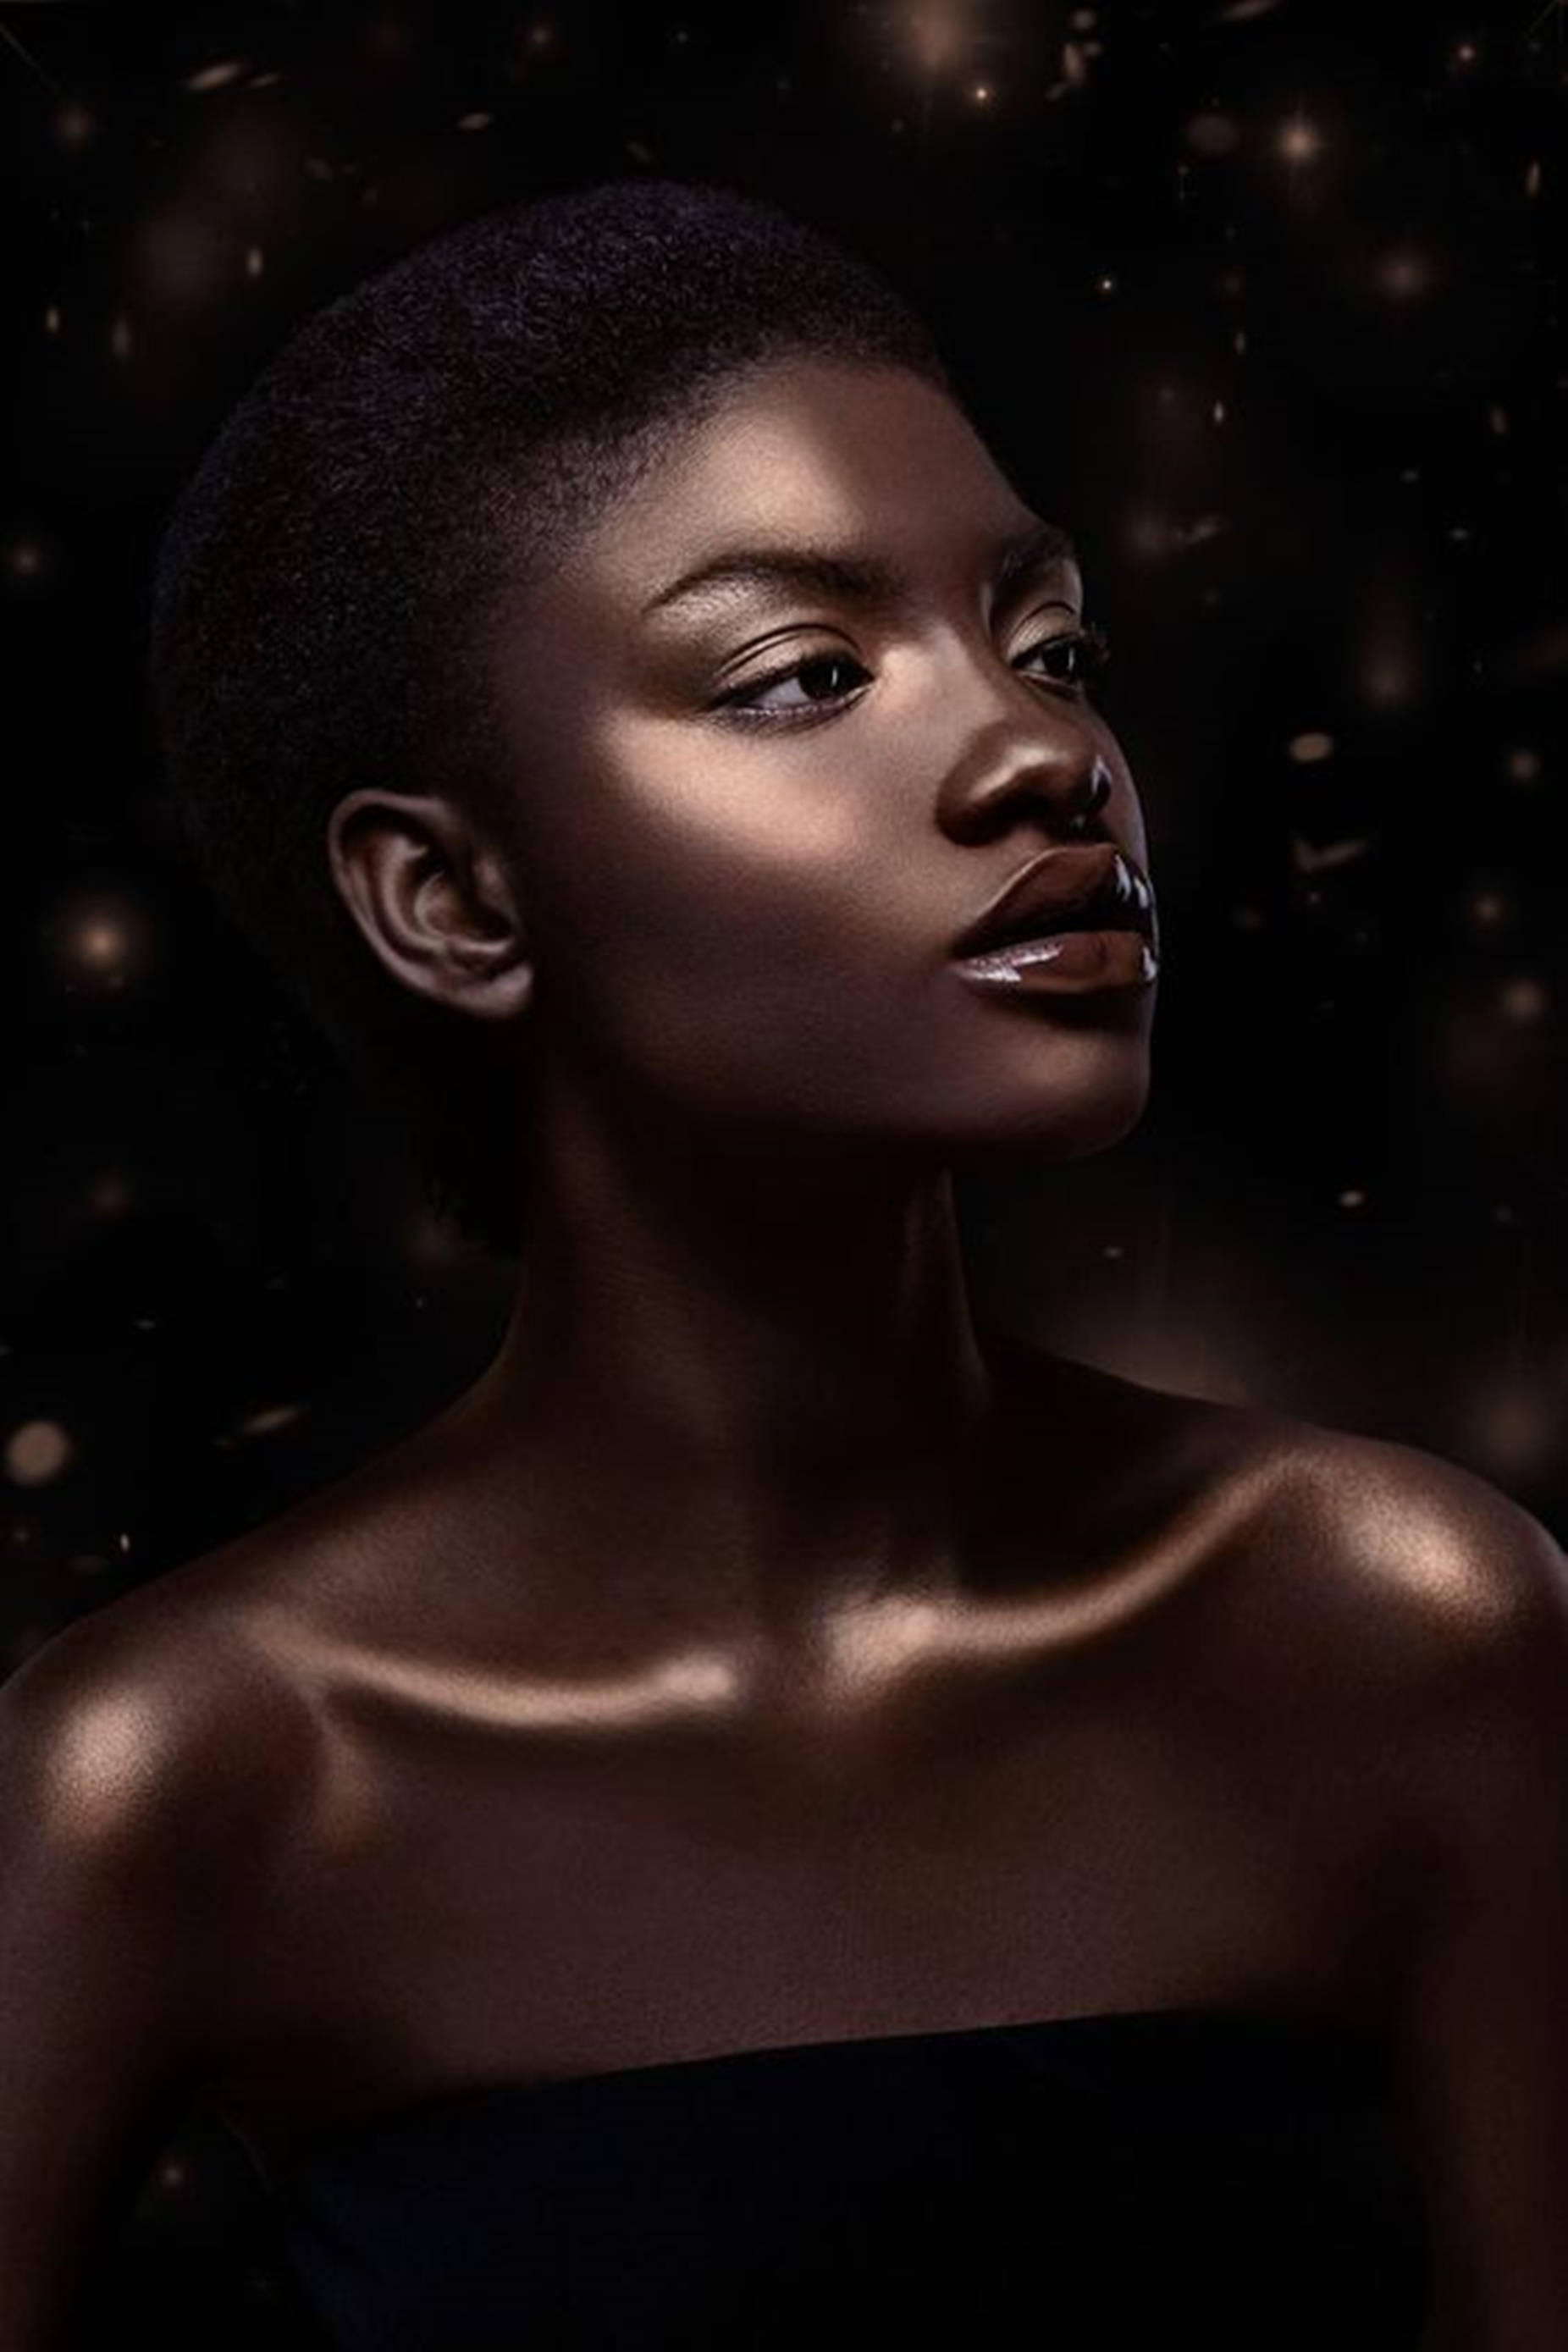 Empowered Beauty: A Radiant Black Woman Wallpaper